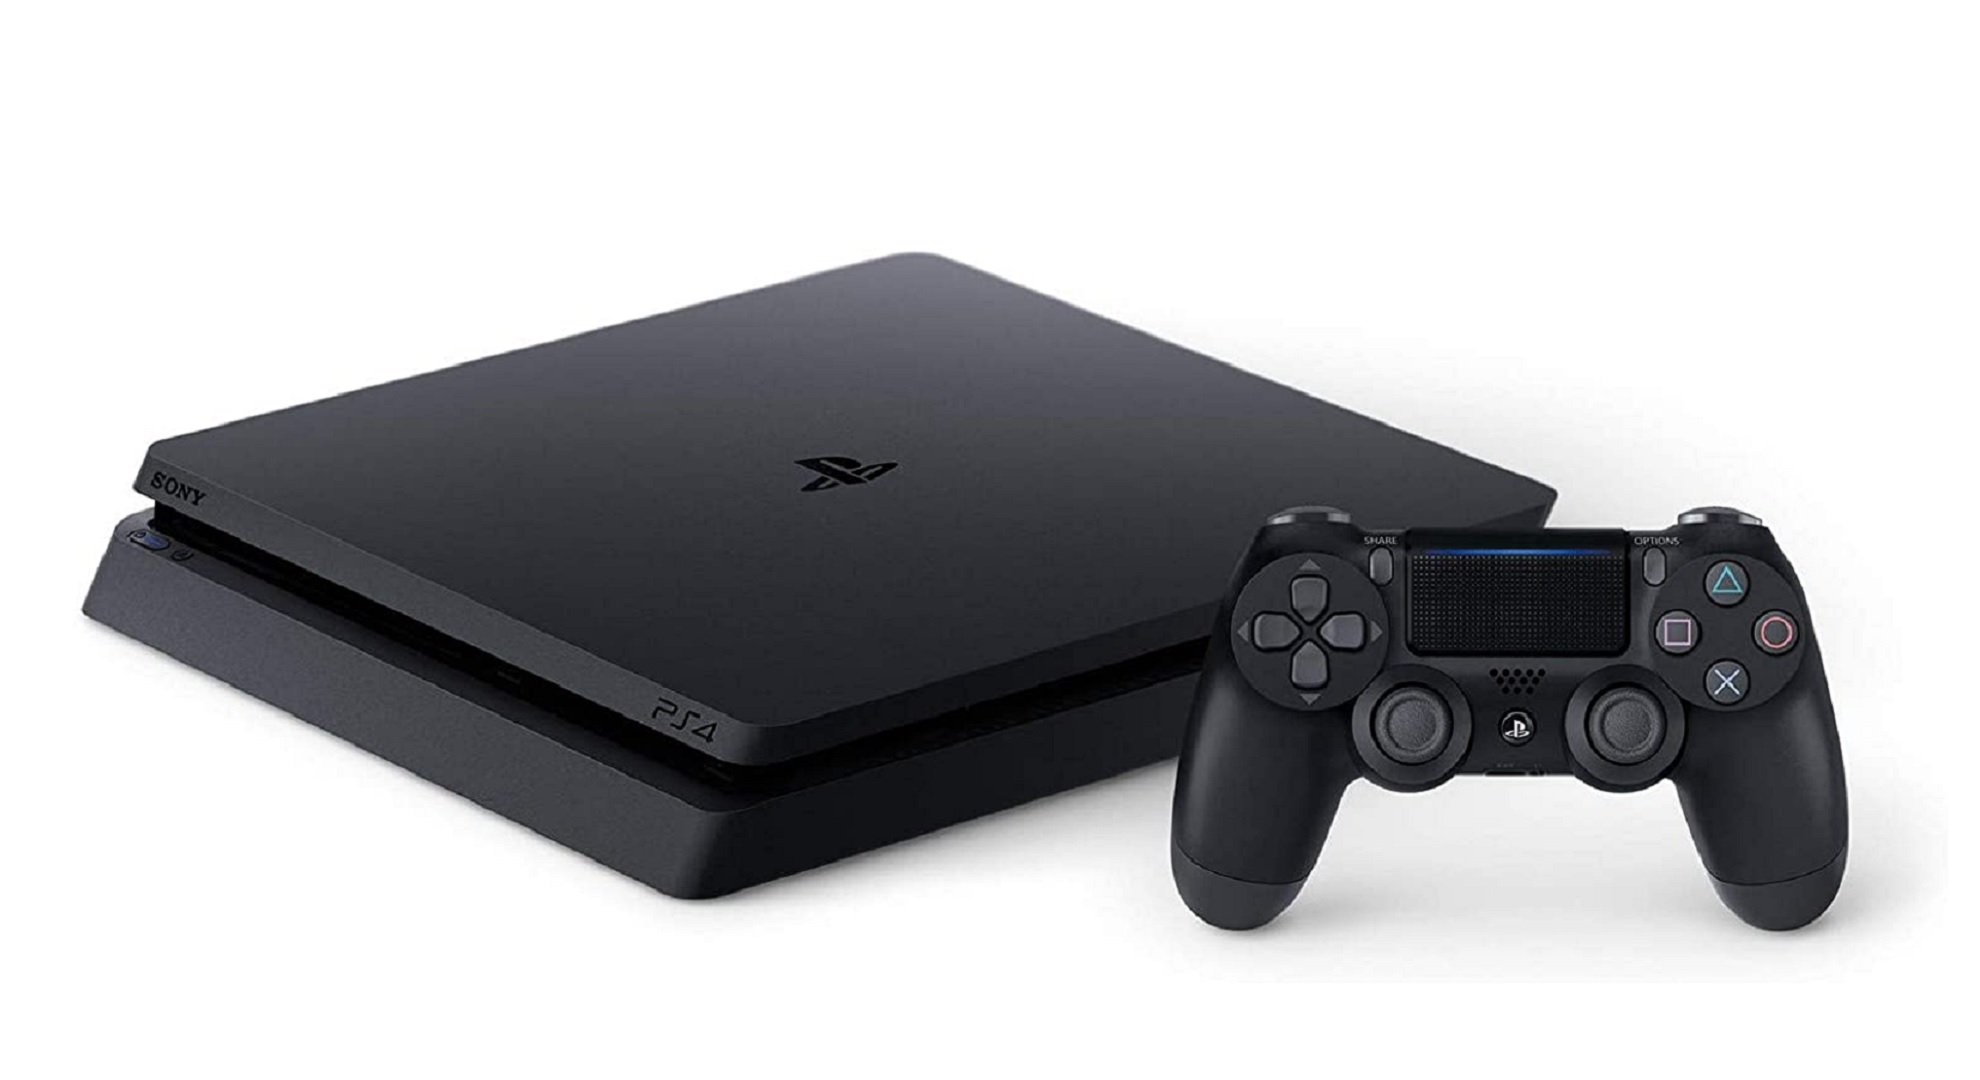 Sony expects to entirely phase out PS4 releases within three years